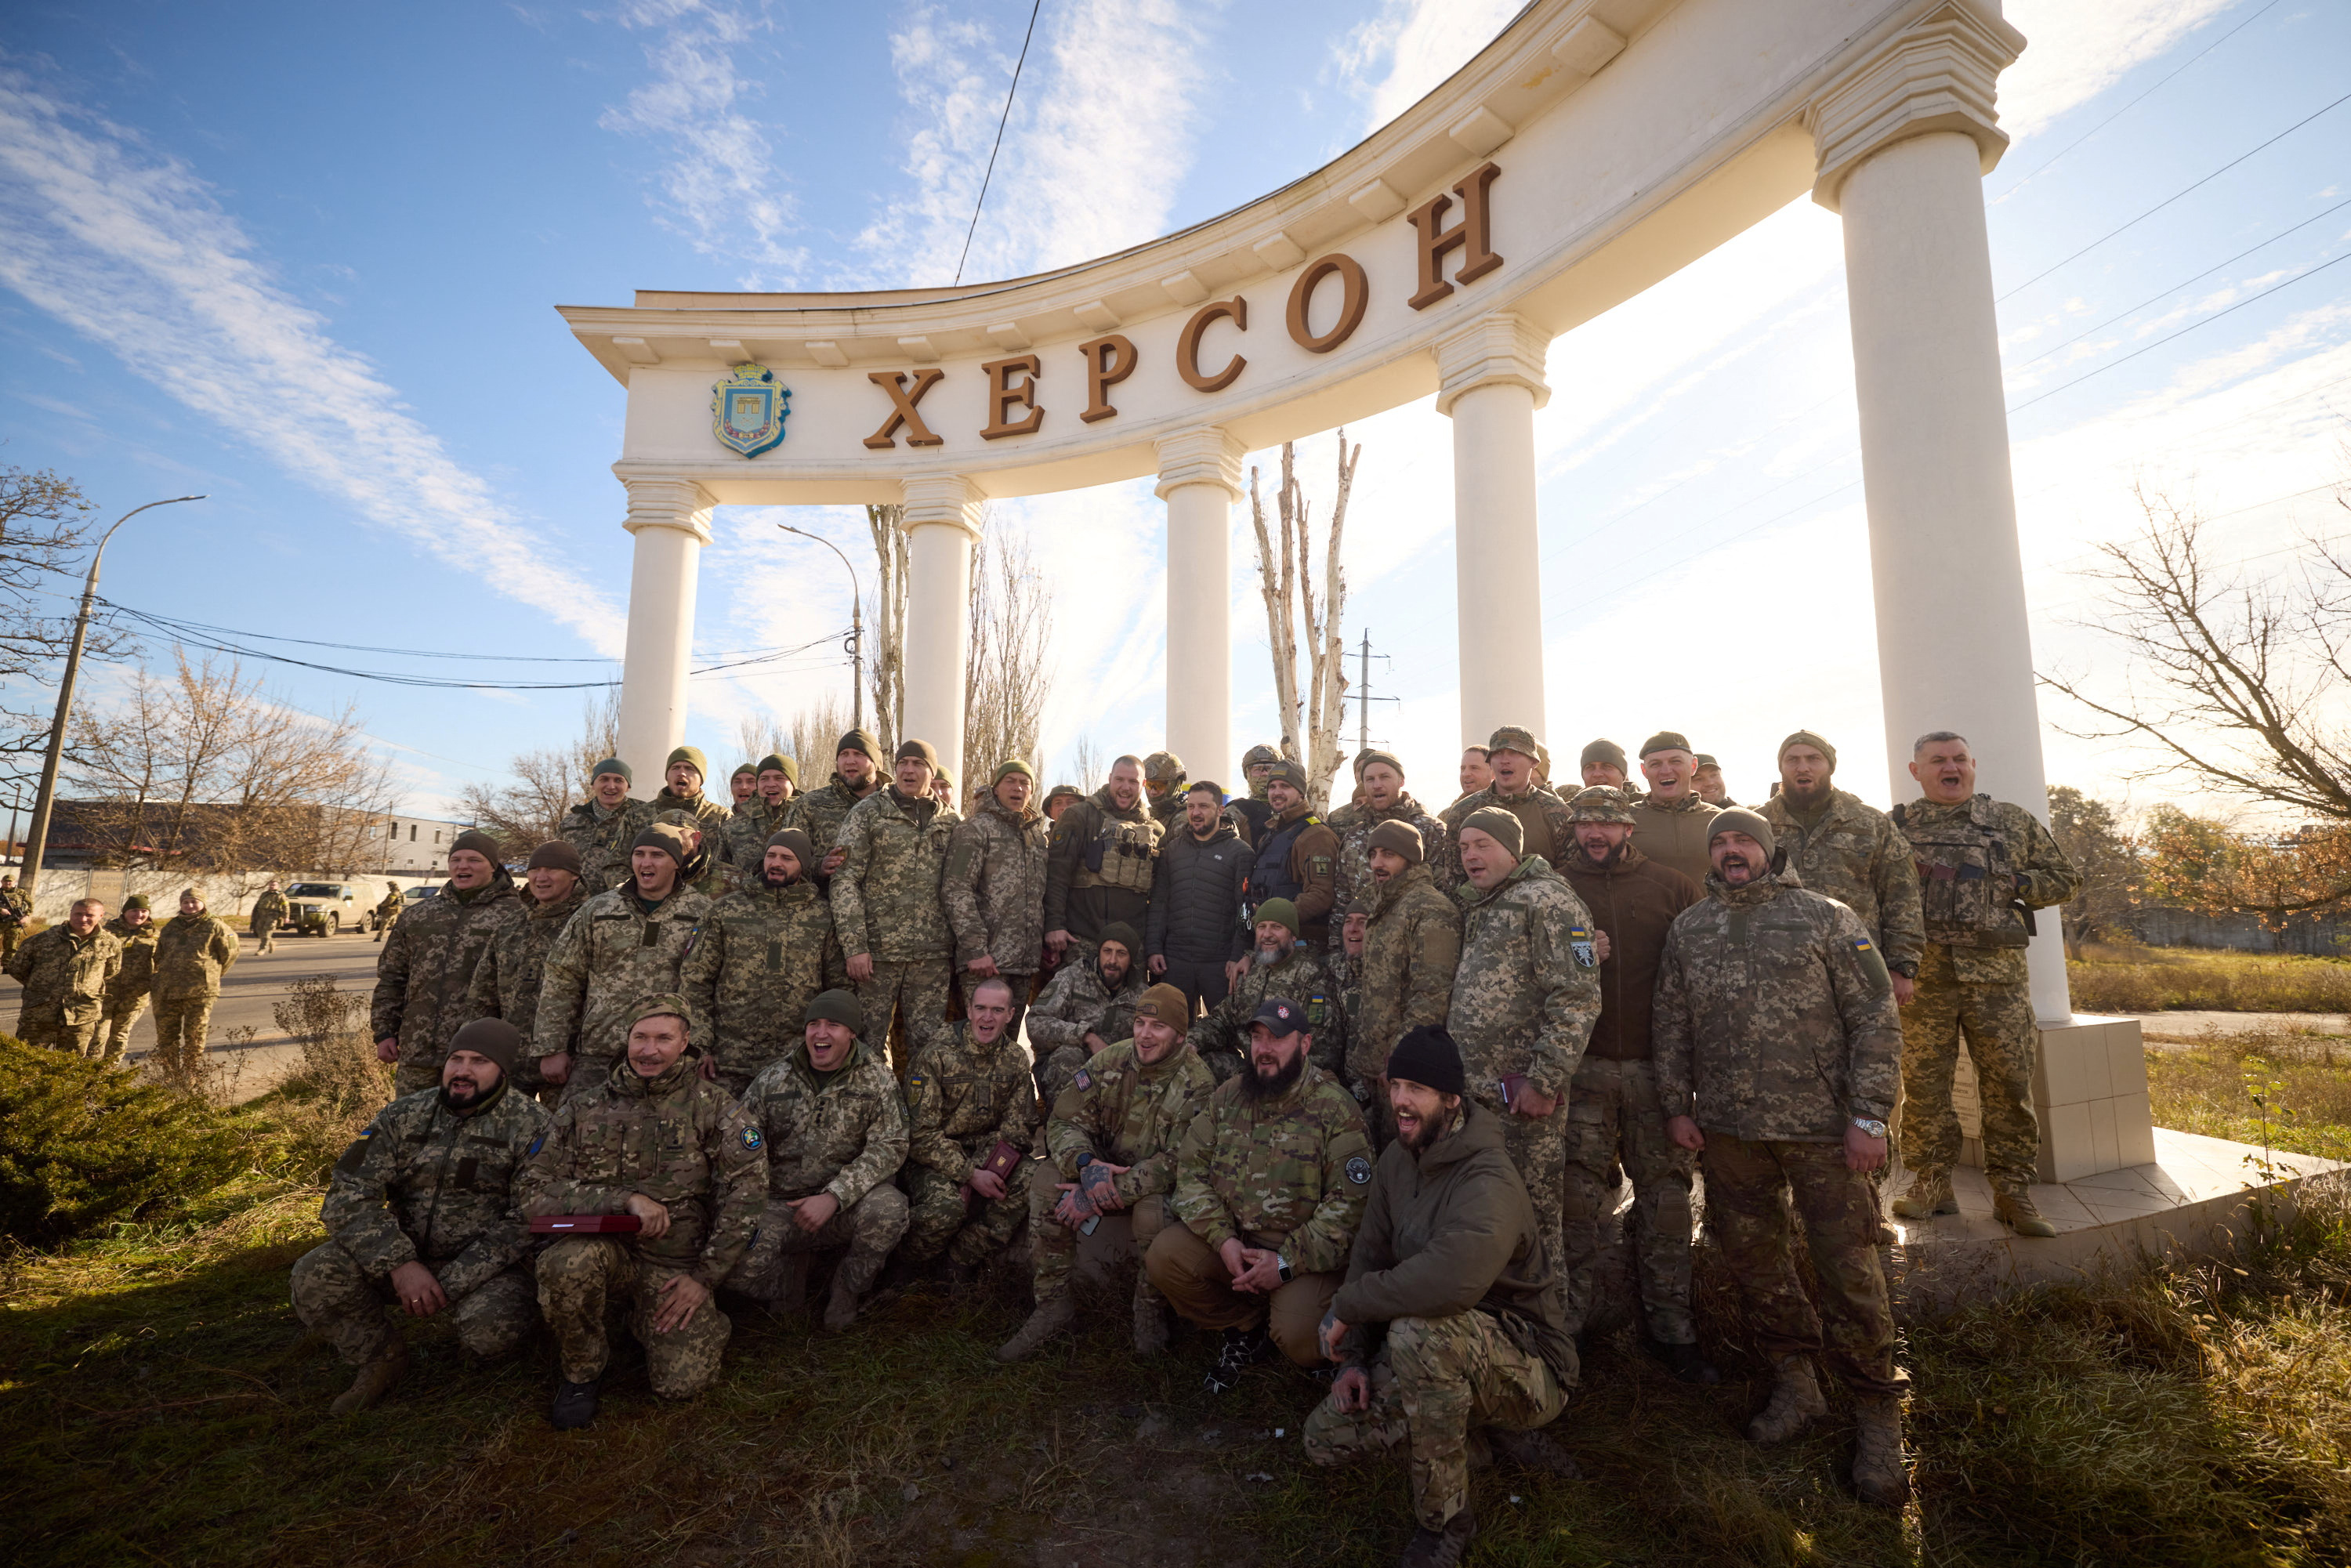 Volodymyr Zelensky visited Kherson and met with fighters who liberated the key city in southern Ukraine (AP).